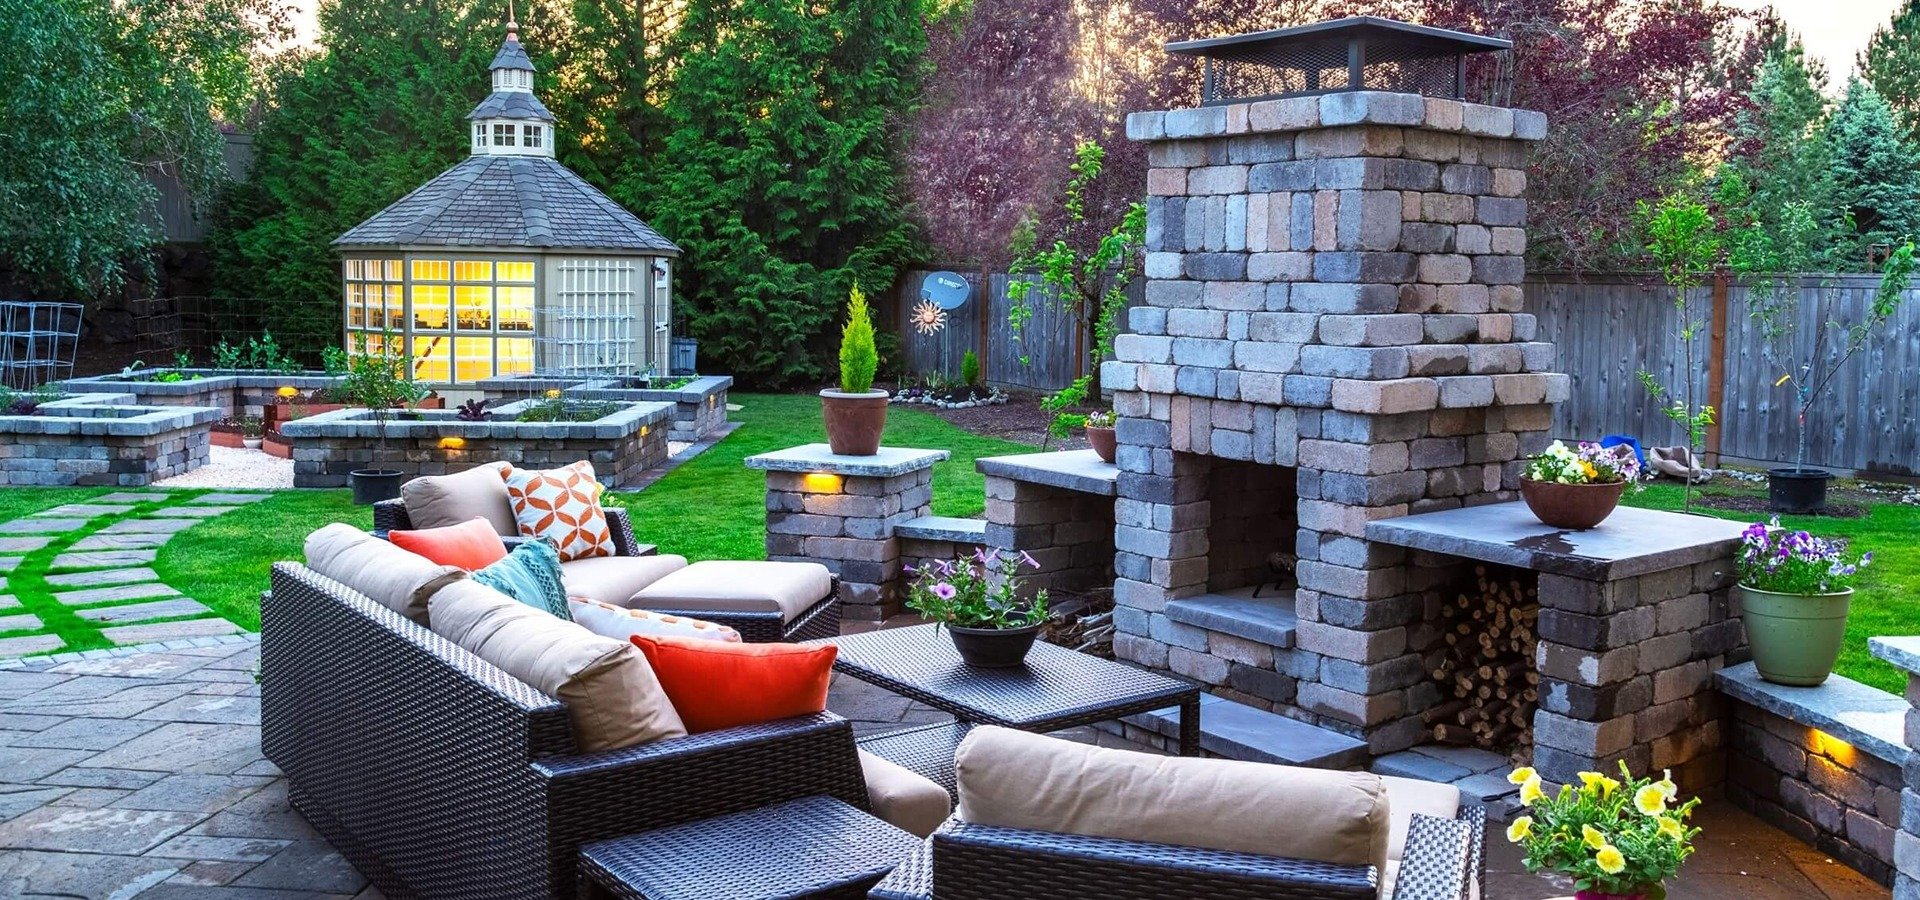 Landscape design, paver patio, fire pit, outdoor kitchen, outdoor lighting in Issaquah WA